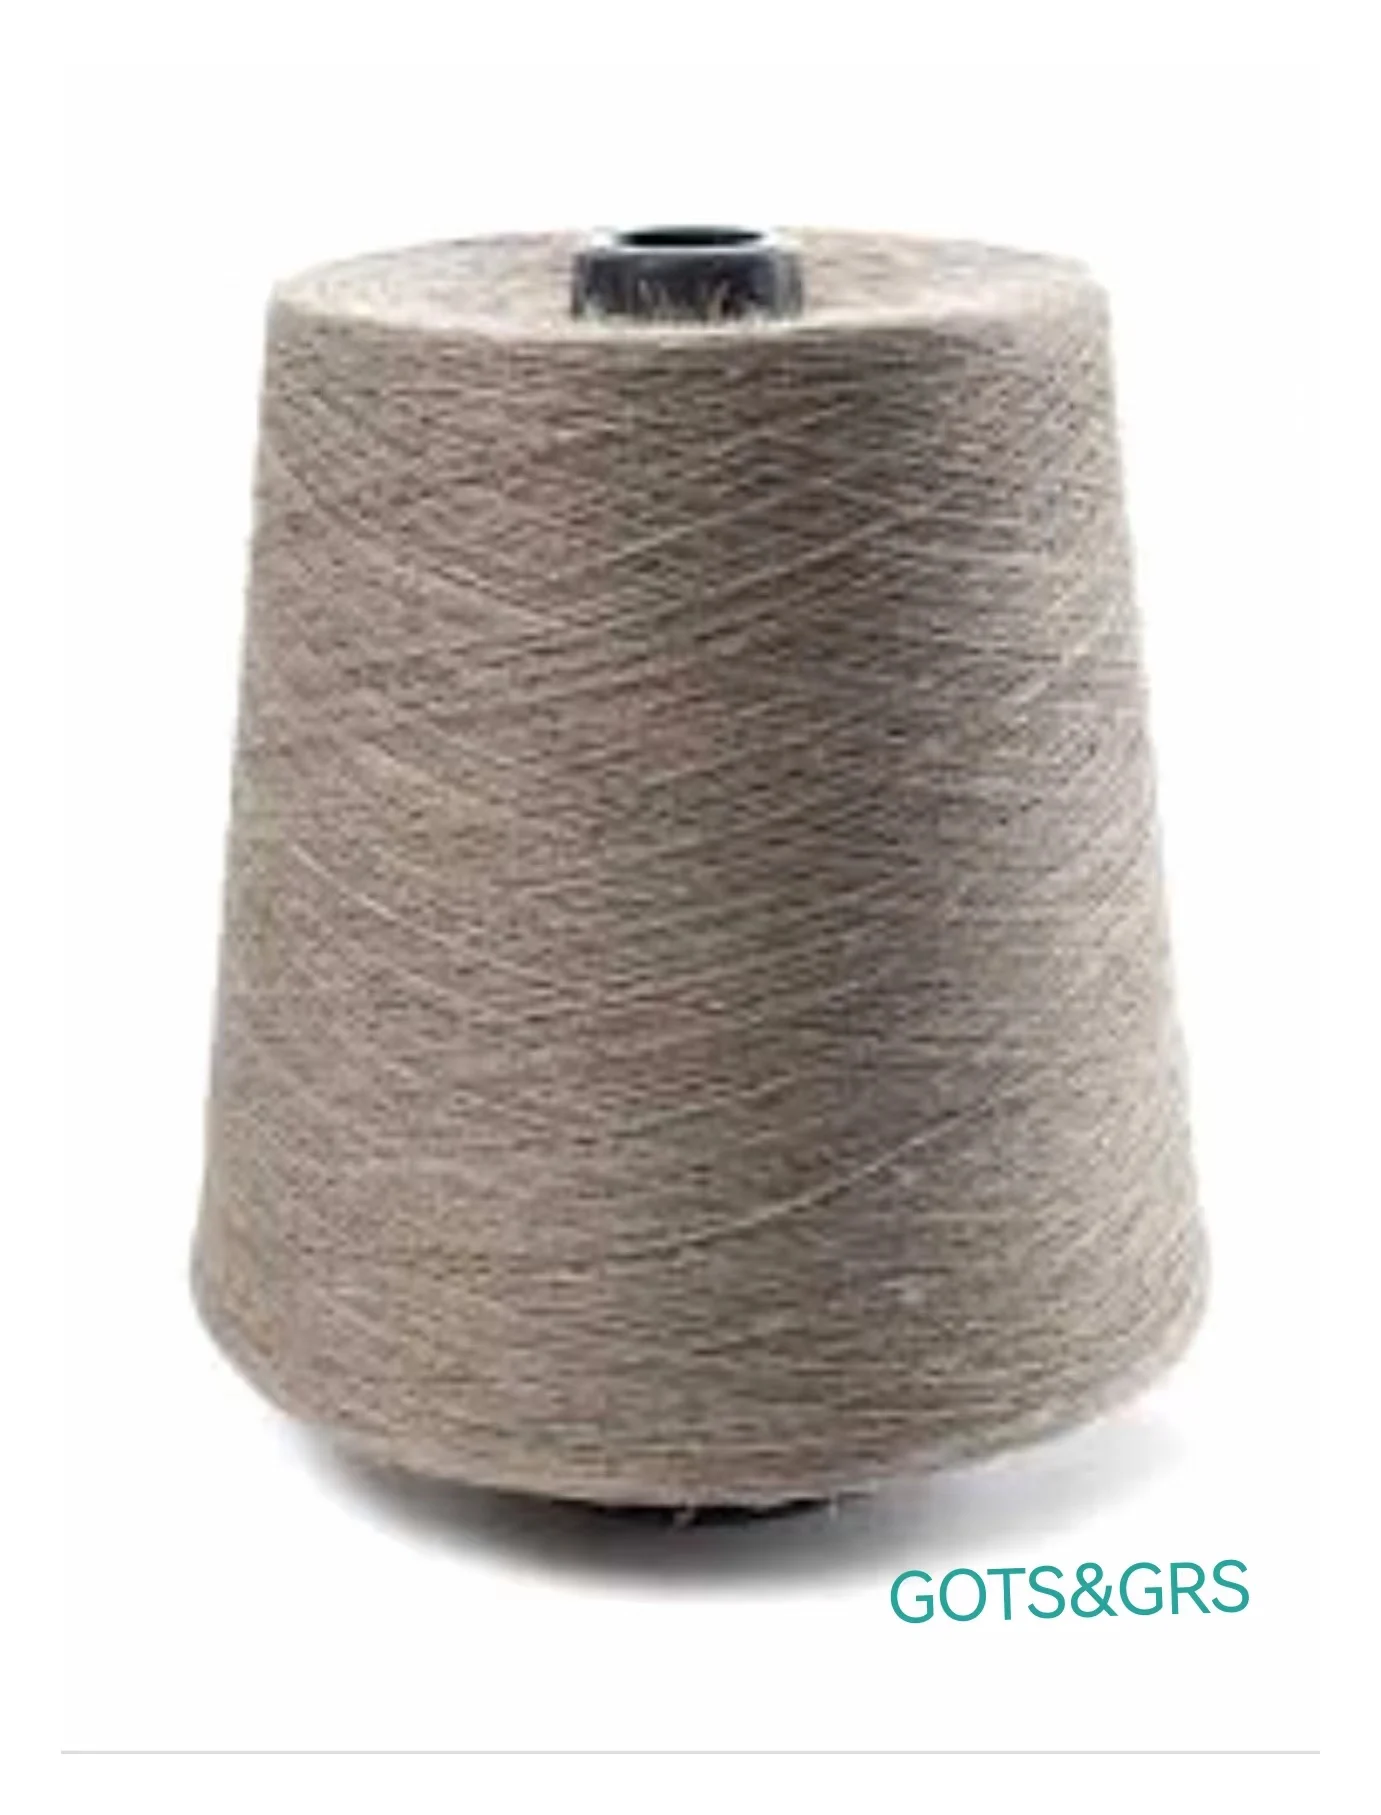 JECATEX 21S 30% ORGANIC  LINEN 70%VISCOSE YARN FRENCH LINEN, WHOLESALE  GOTS  OCS CERTIFIED,SUSTAINABLE WOVEN AND KNIT